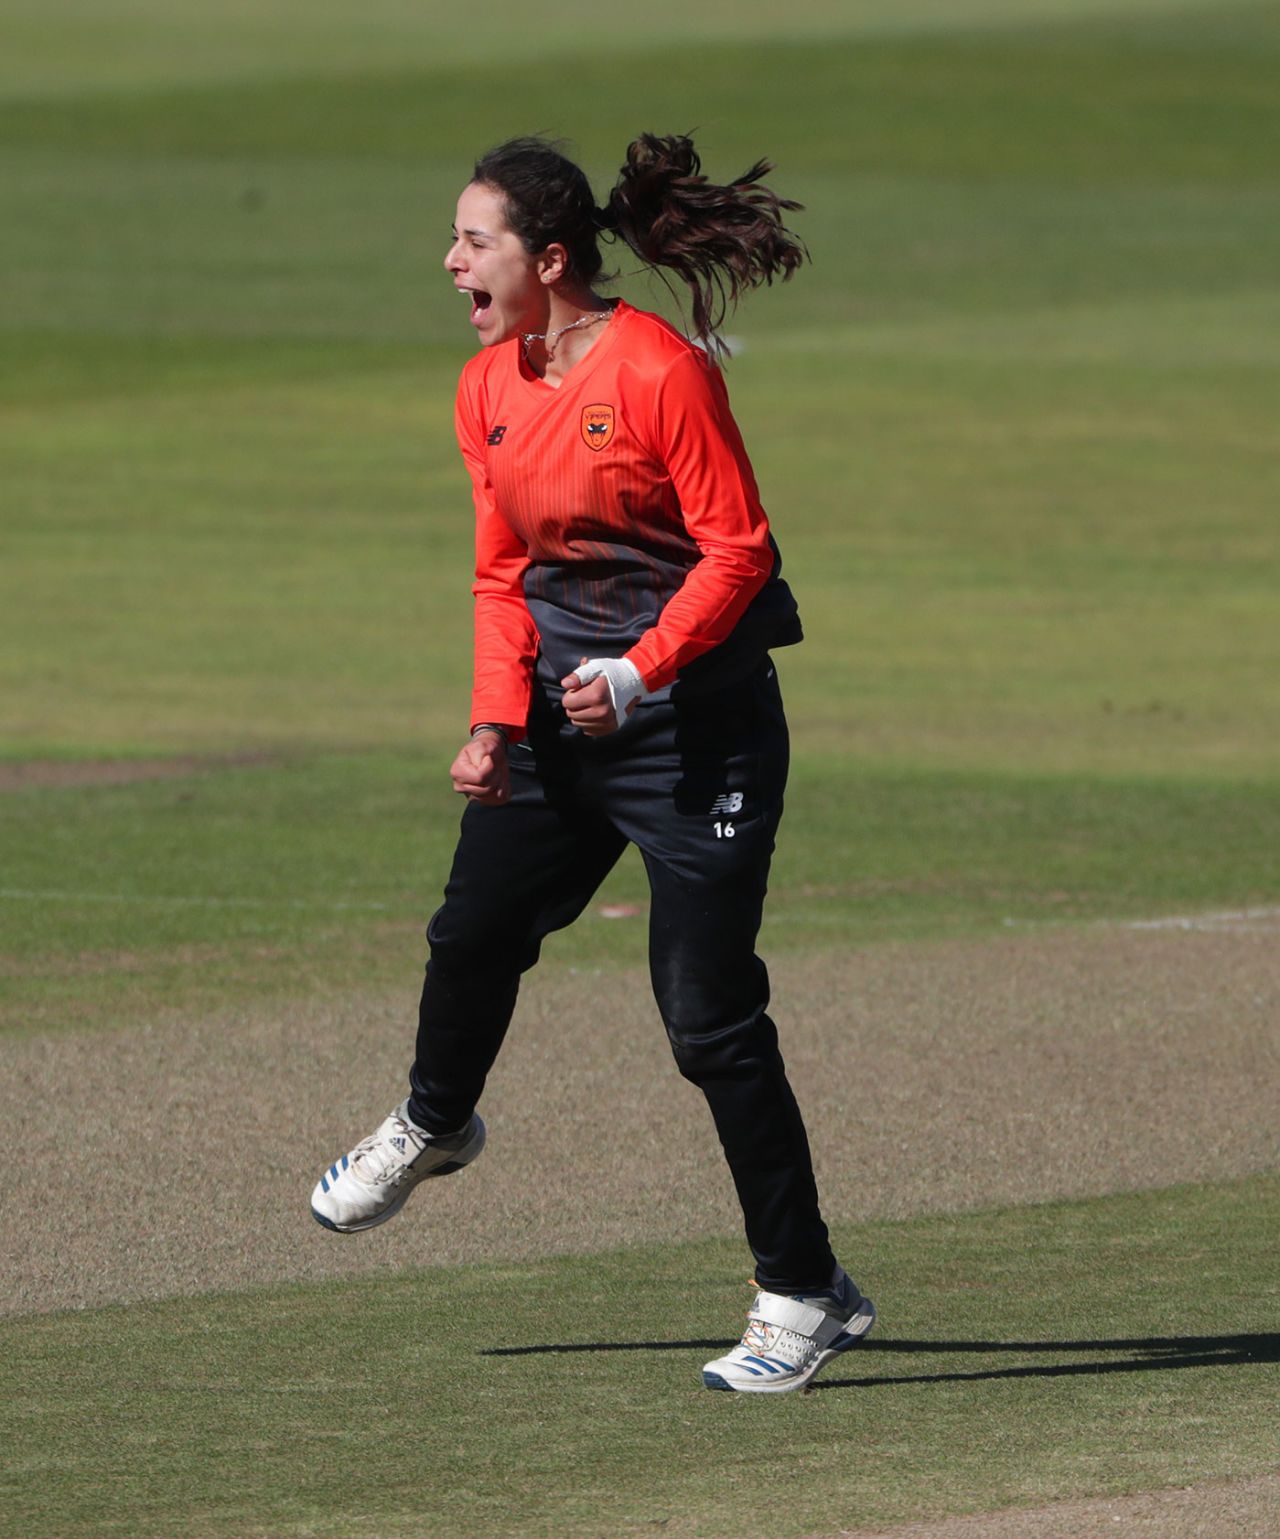 Maia Bouchier claims the wicket of Lauren Winfield-Hill in the RHF FInal, Edgbaston, September 27, 2020